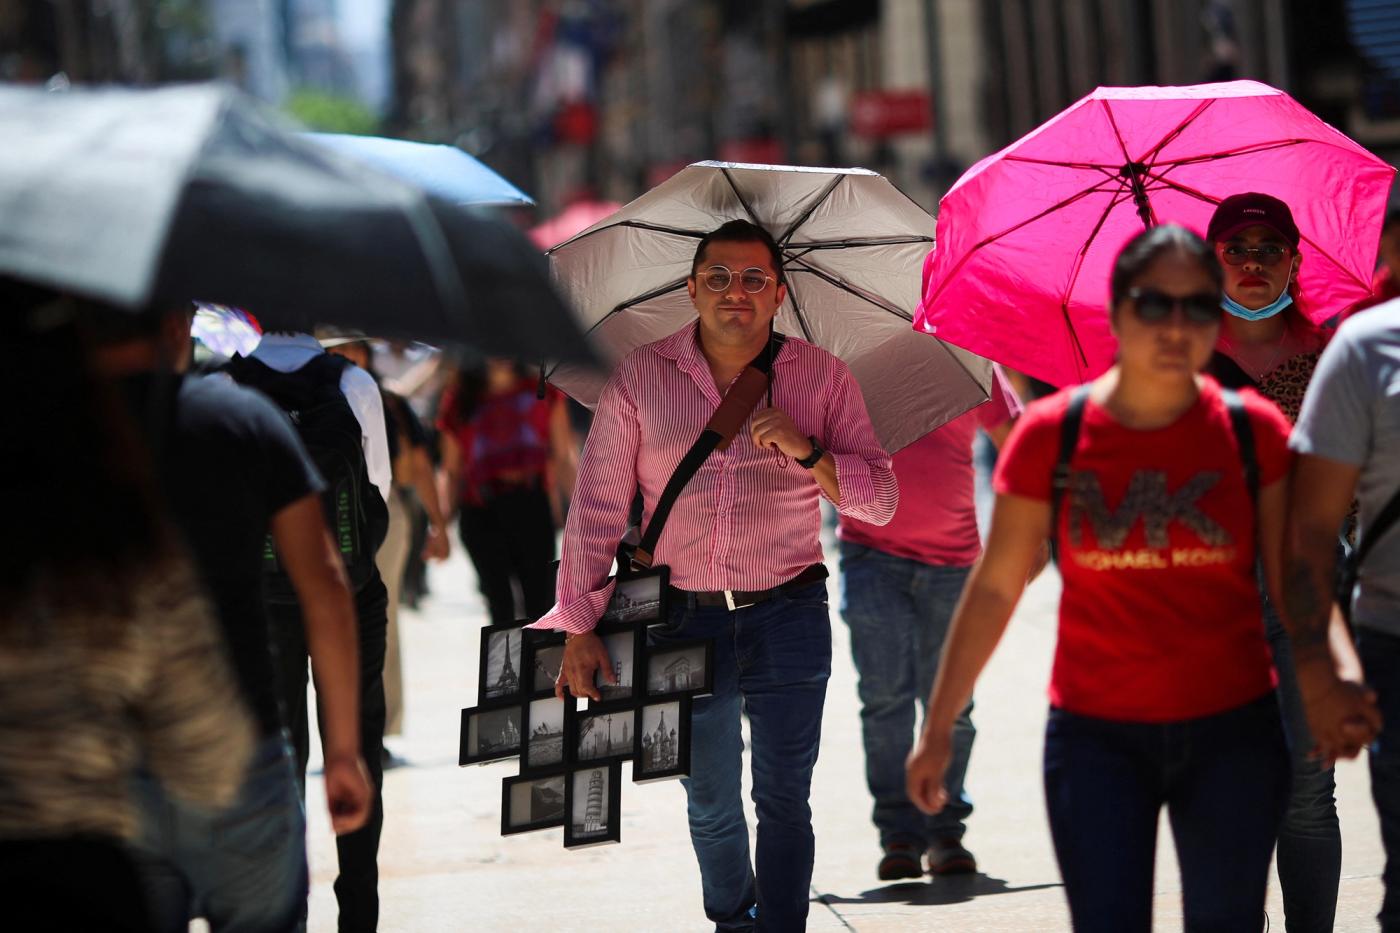 People walk during a period of high temperatures in Mexico City, Mexico June 13, 2023. REUTERS/Henry Romero